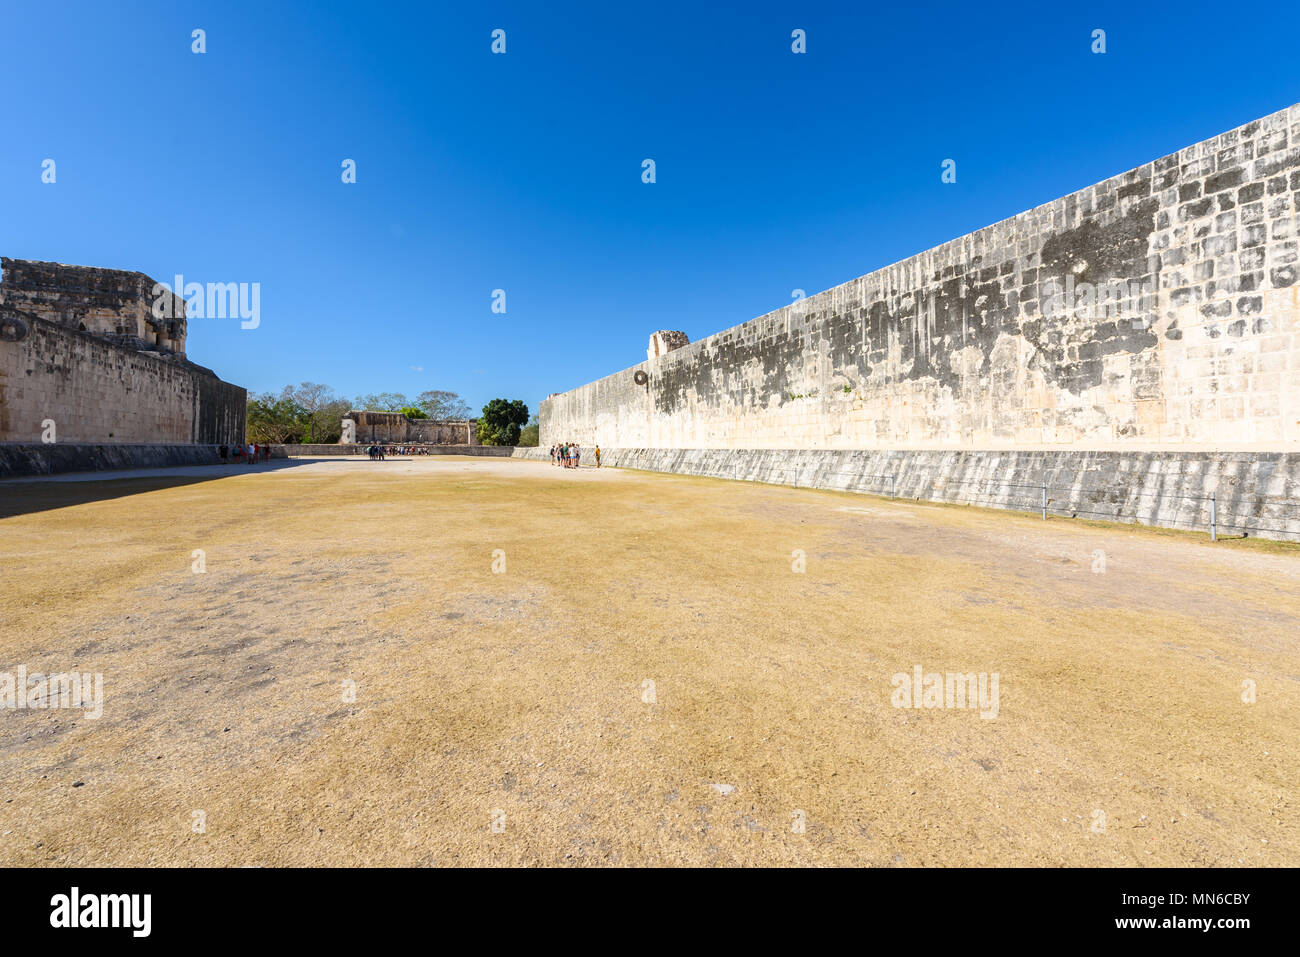 View of the ballcourt at Chichen Itza, old historic ruins in Yucatan, Mexico Stock Photo